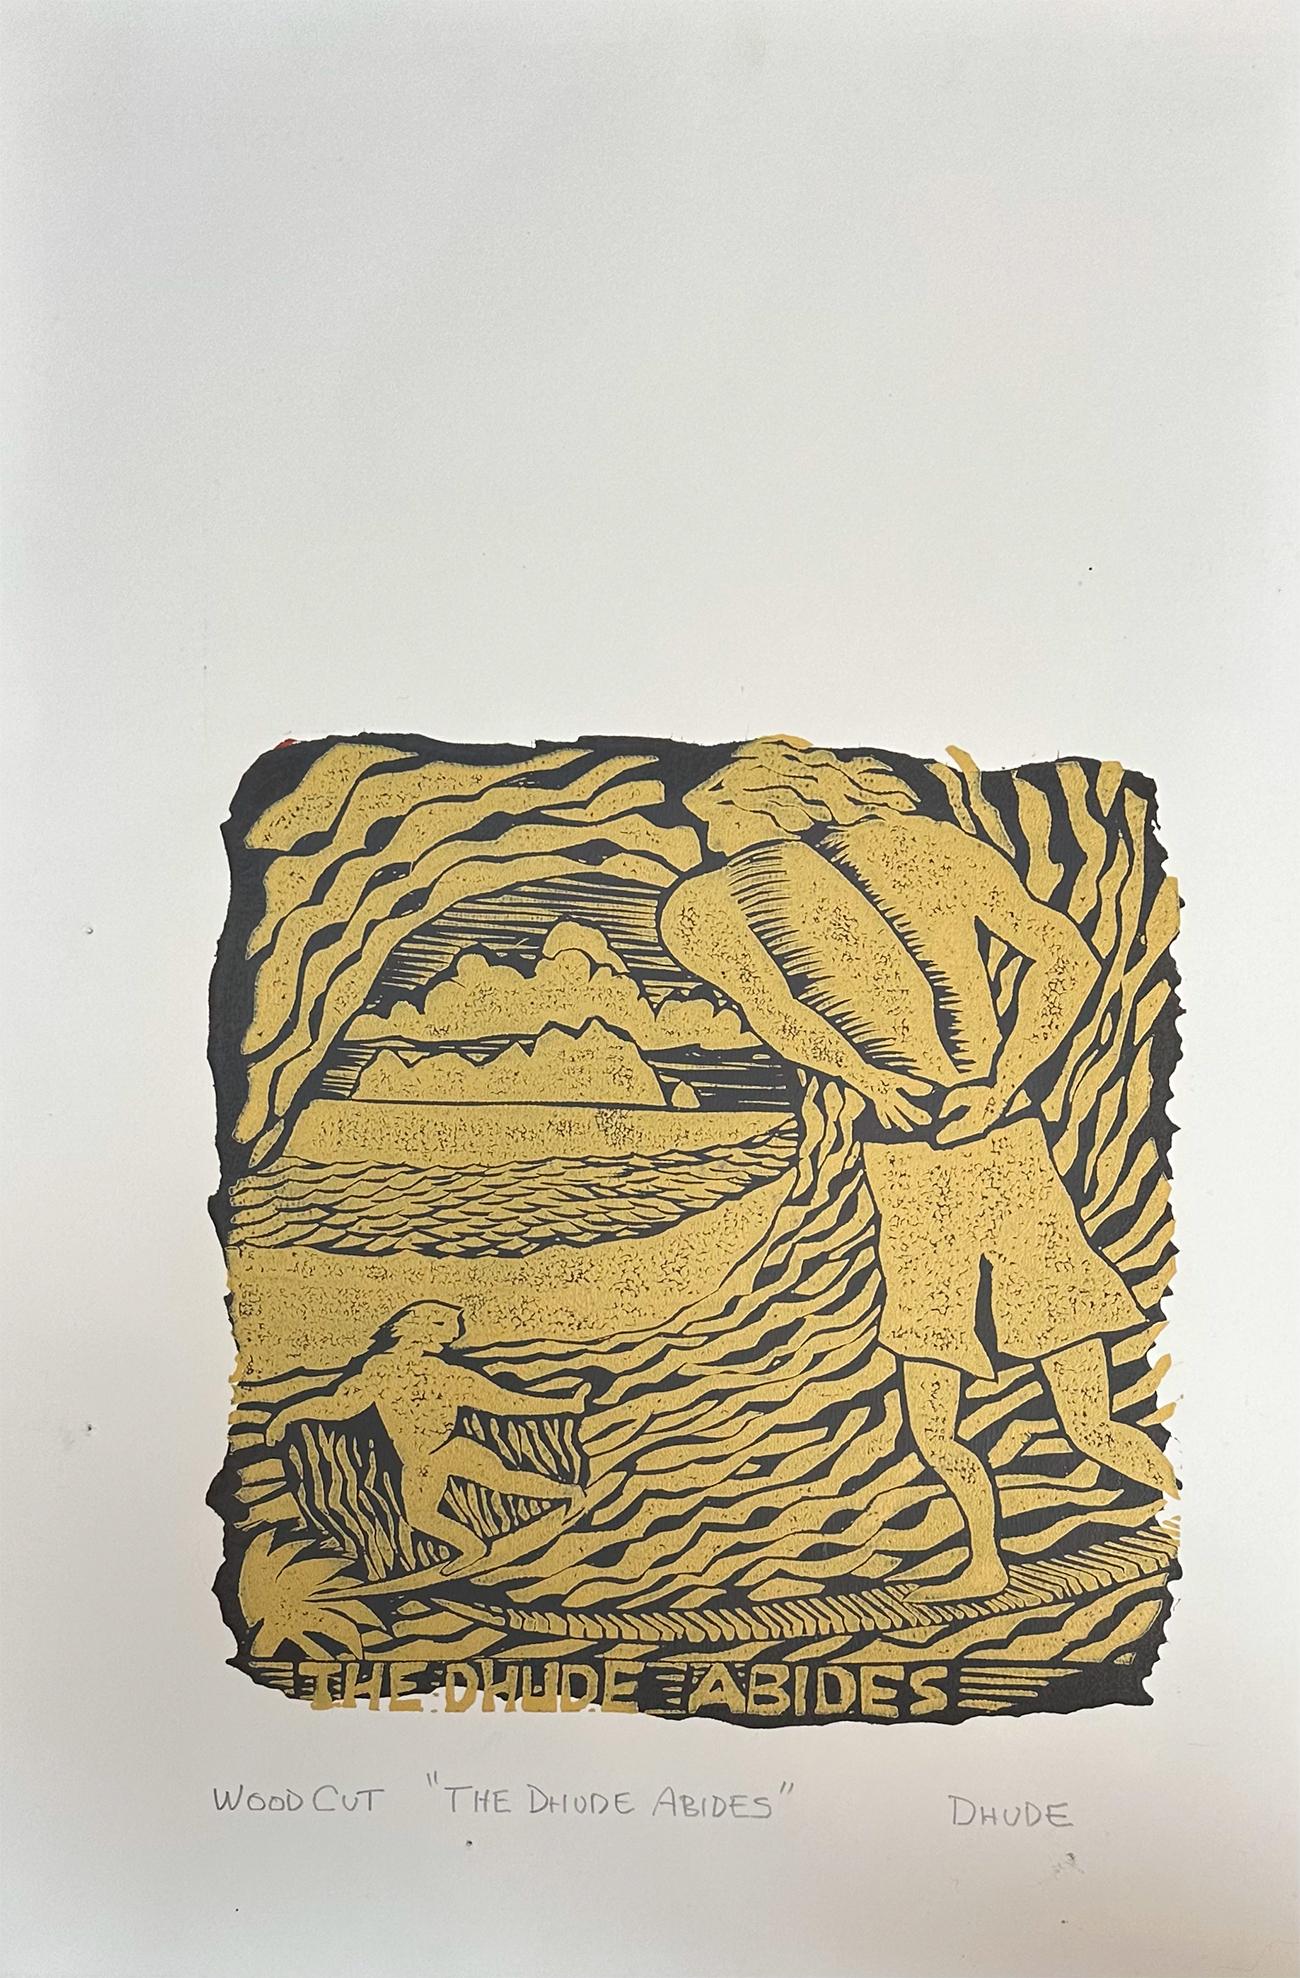 The Dhude Abides - Surfing Art - Figurative - Woodcut Print By Marc Zimmerman

Limited Edition 01/04

This masterwork is exhibited in the Zimmerman Gallery, Carmel CA.

Immerse yourself in the captivating world of surfing and ocean vibes with Marc